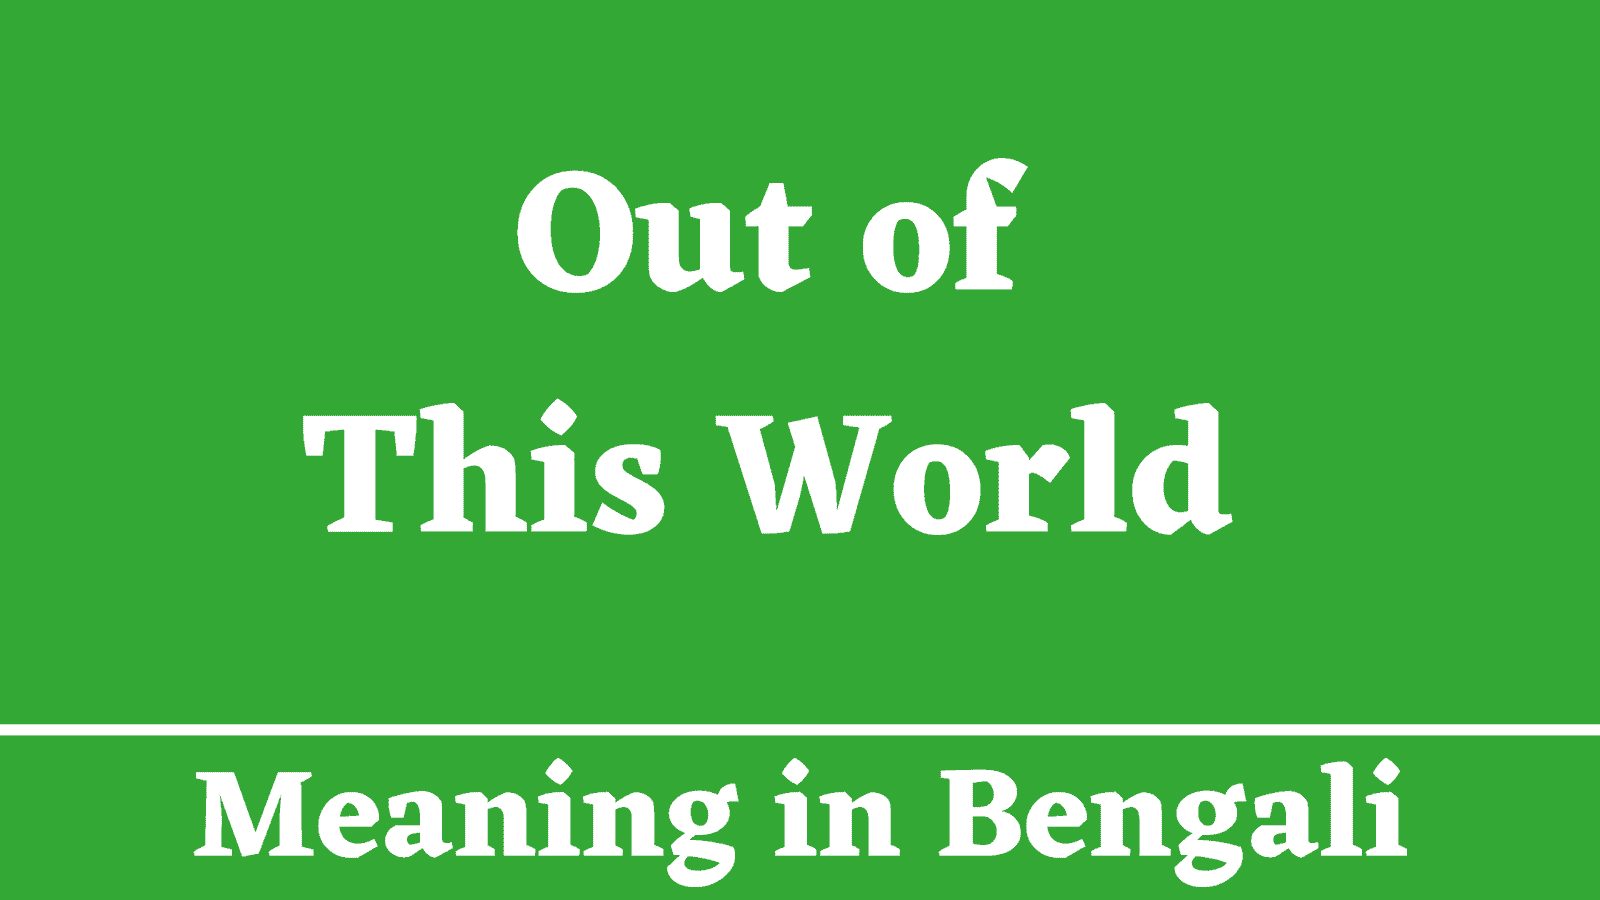 Out of This World Meaning in Bengali